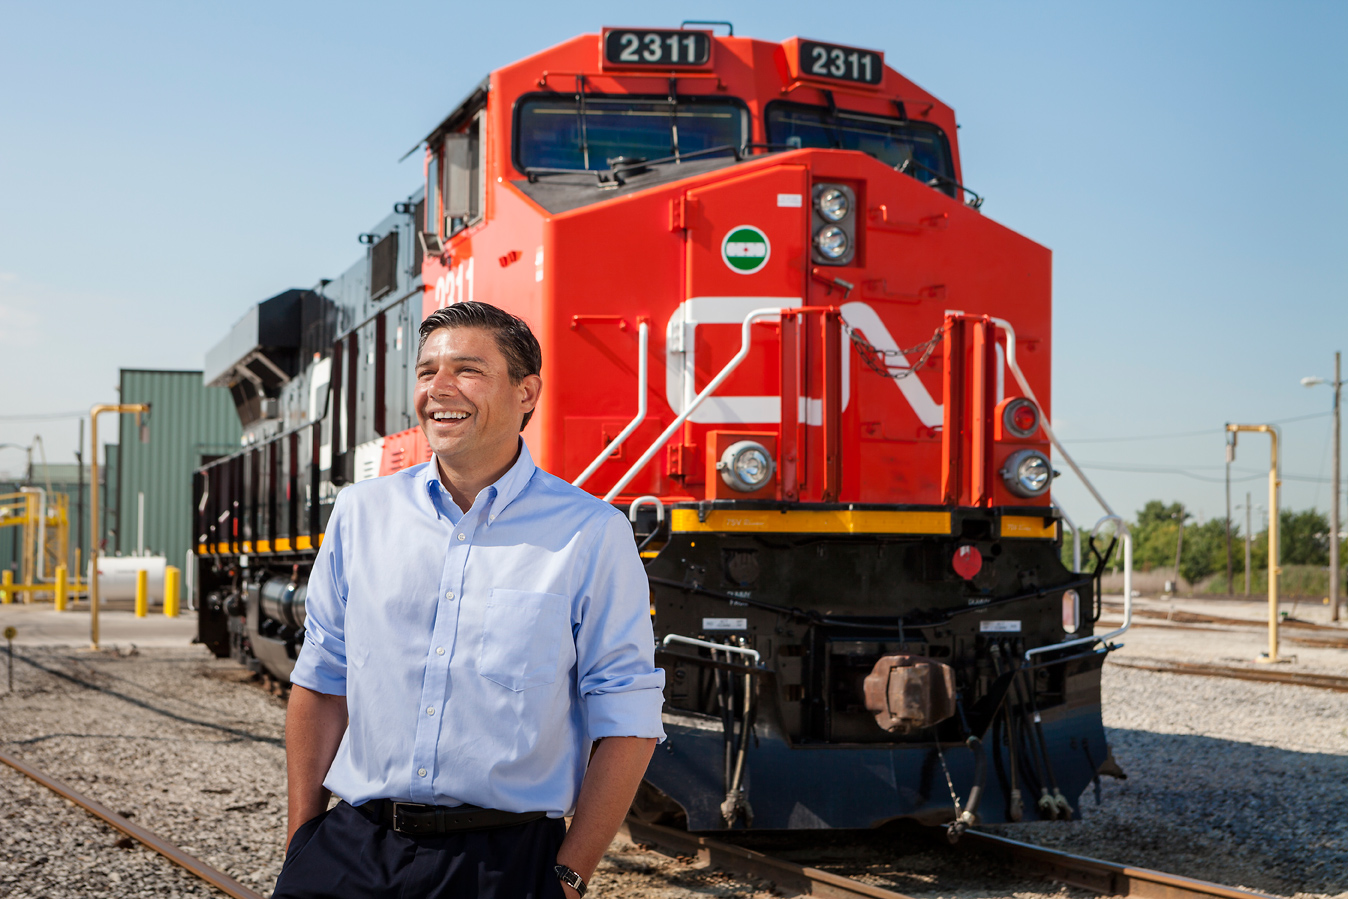 editorial photographer Midwest - Lorenzo Siminelli in front of a train engine